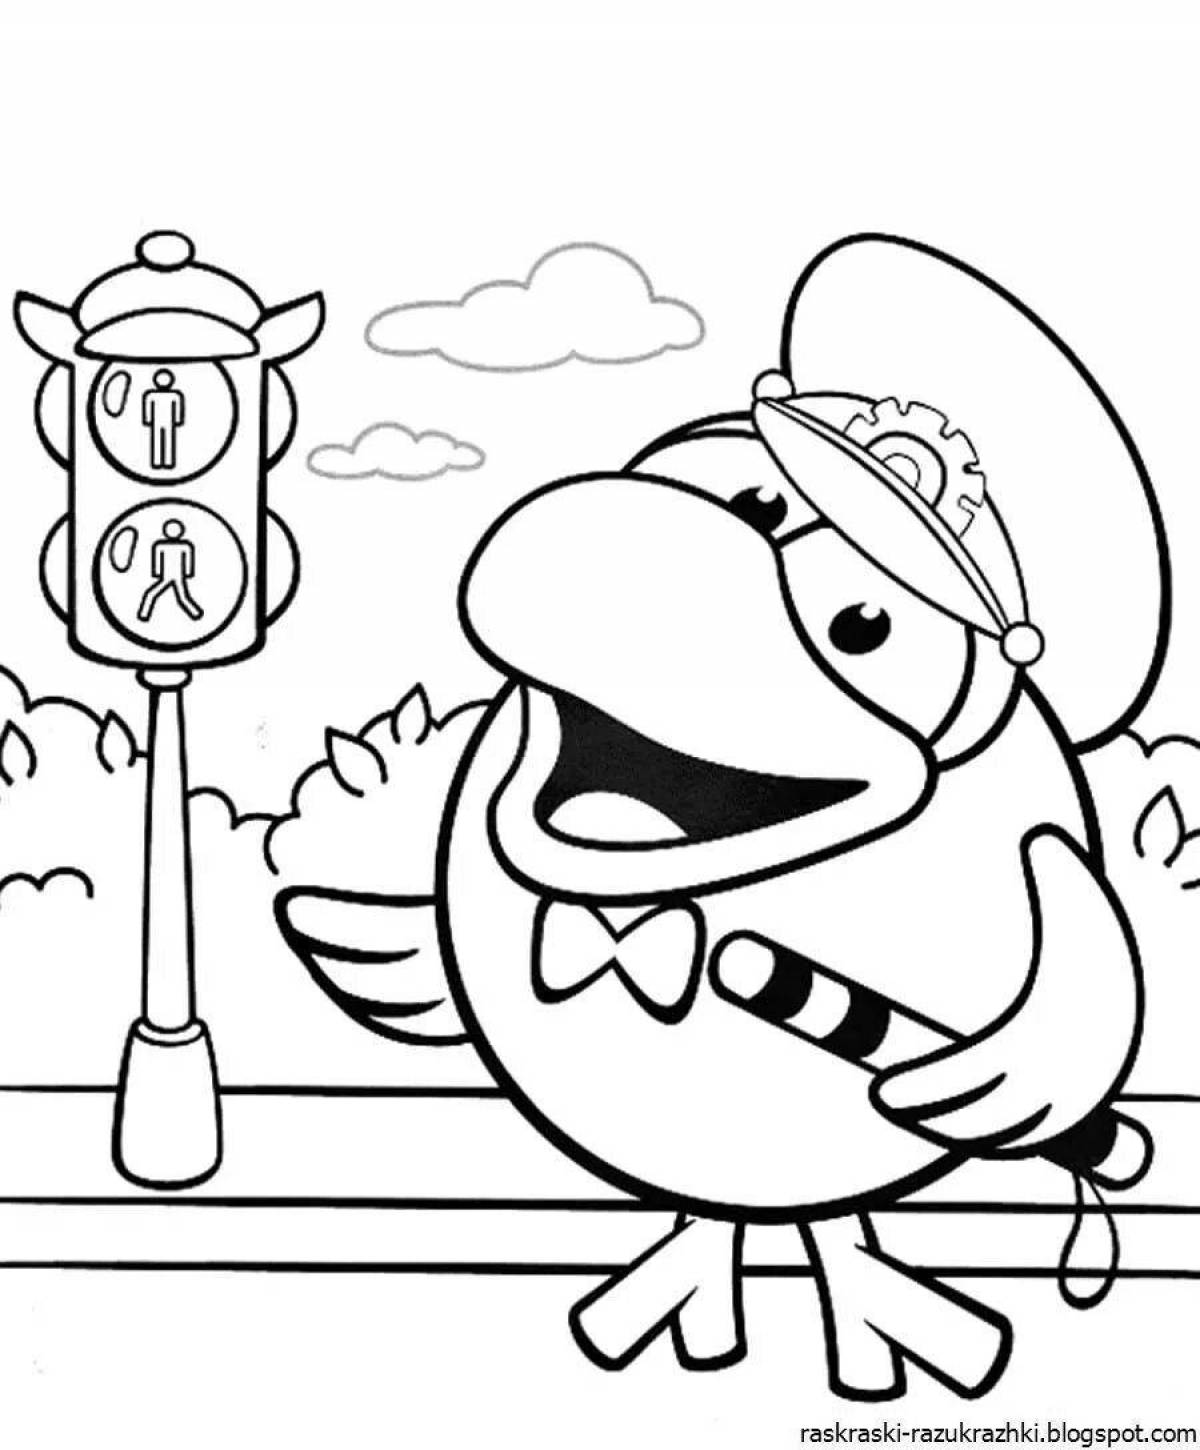 Traffic driving coloring page